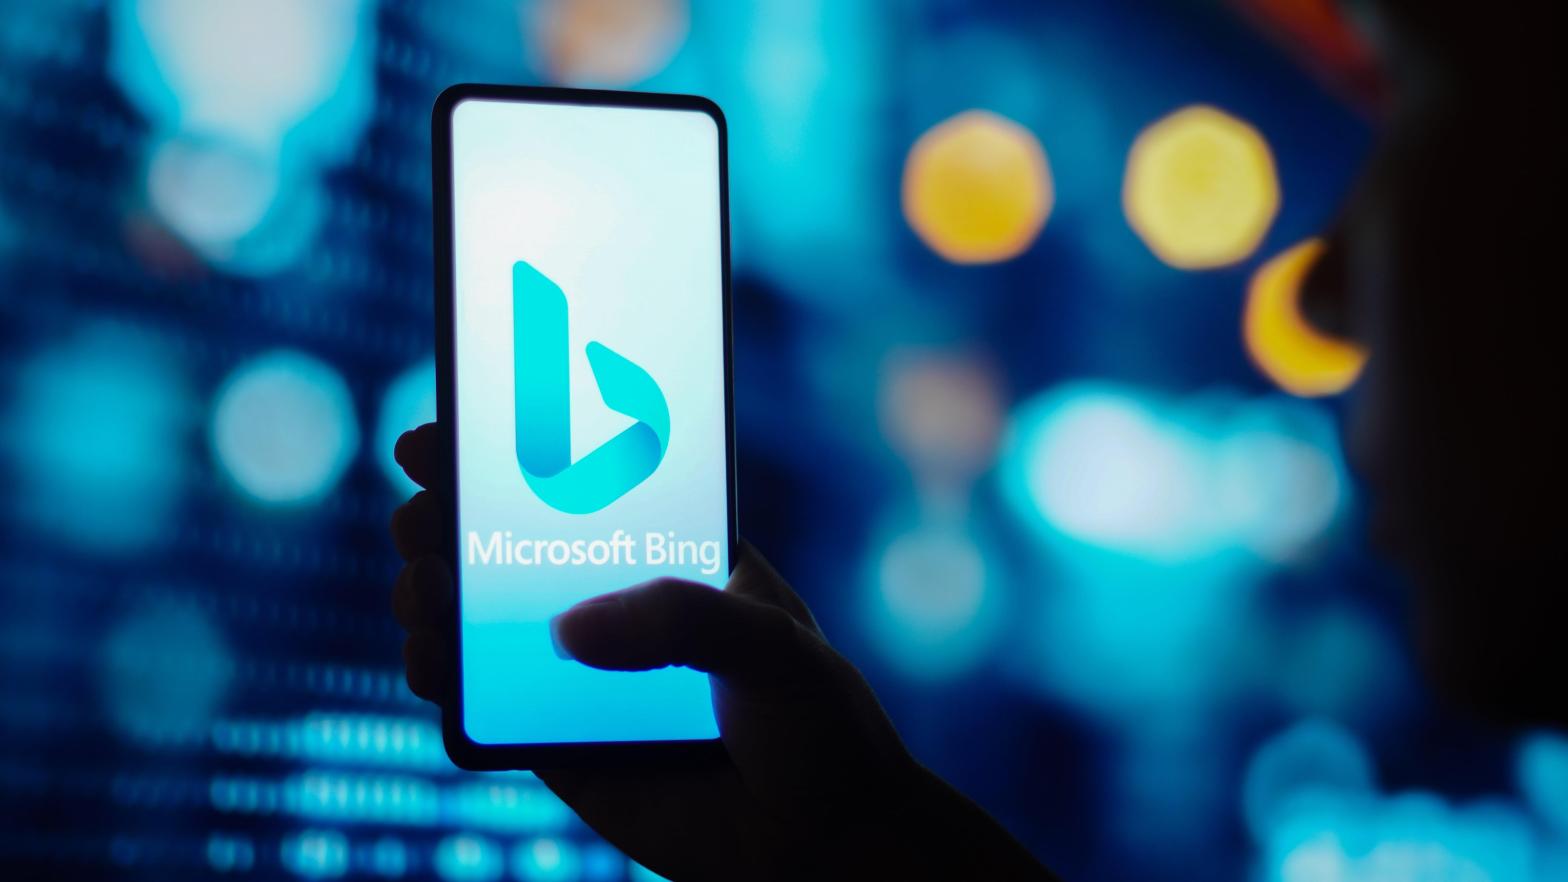 Microsoft released its Bing AI earlier this month, but has since then rolled back how many times users can get chatbot responses per day. (Photo: rafapress, Shutterstock)